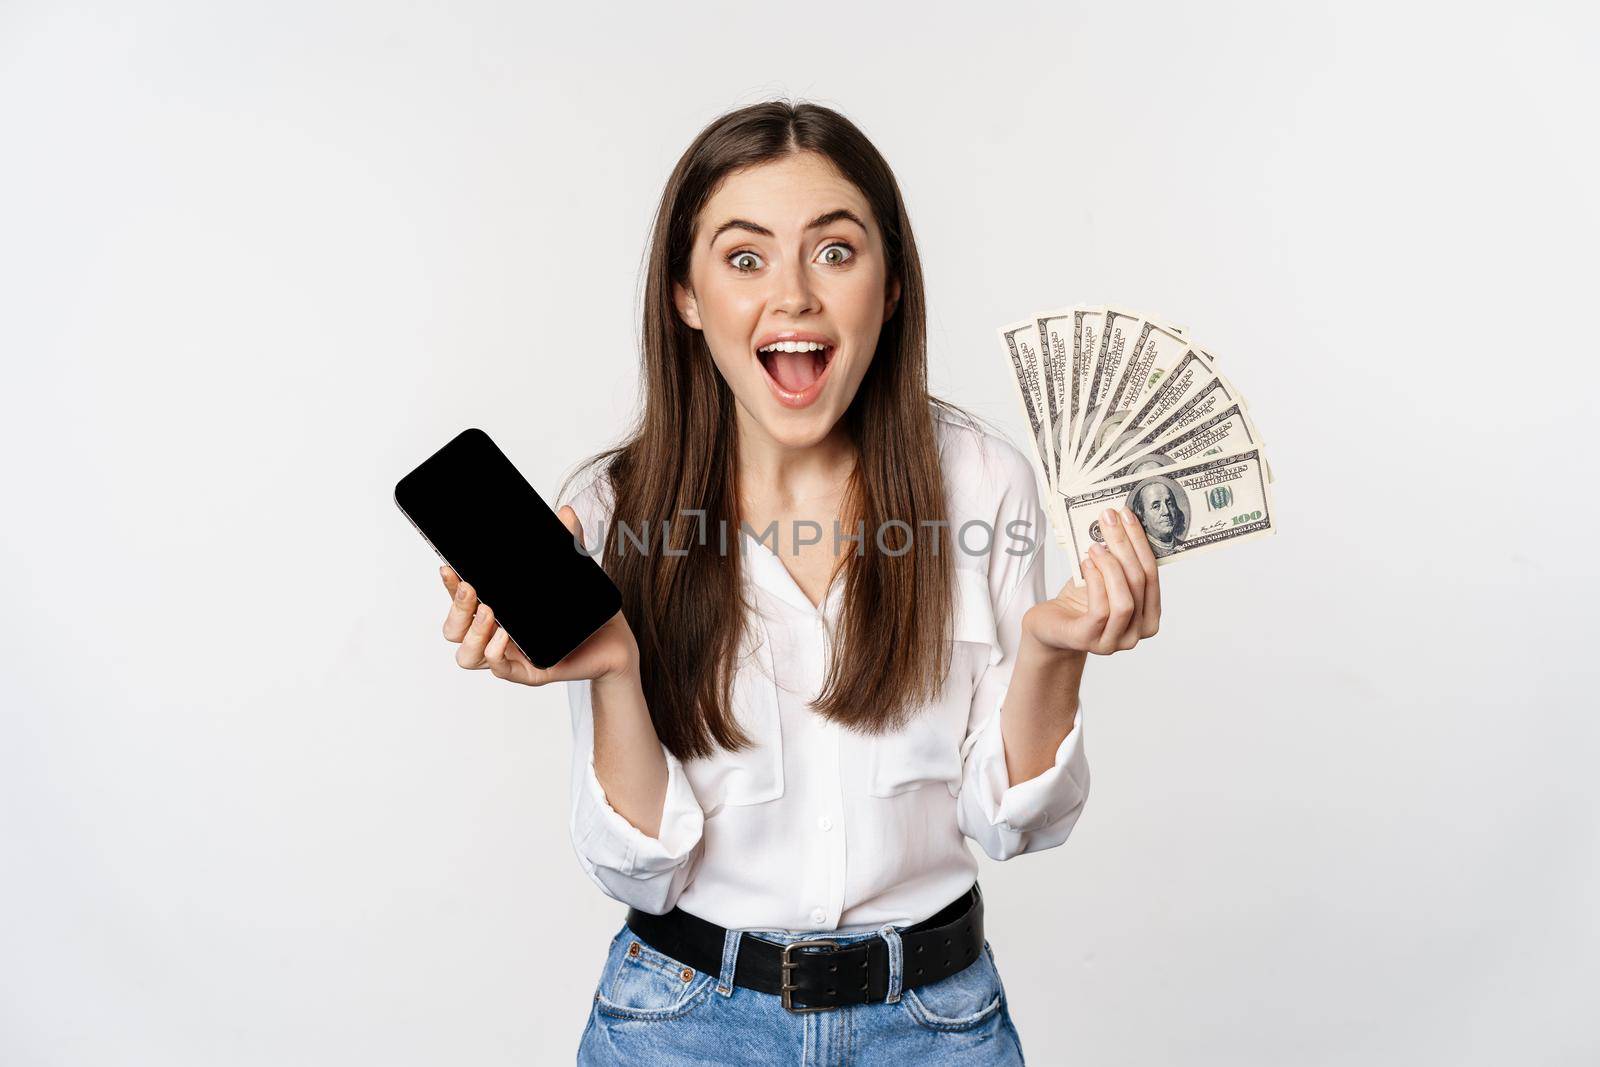 Enthusiastic young woman winning money, showing smartphone app interface and cash, microcredit, prize concept, standing over white background.